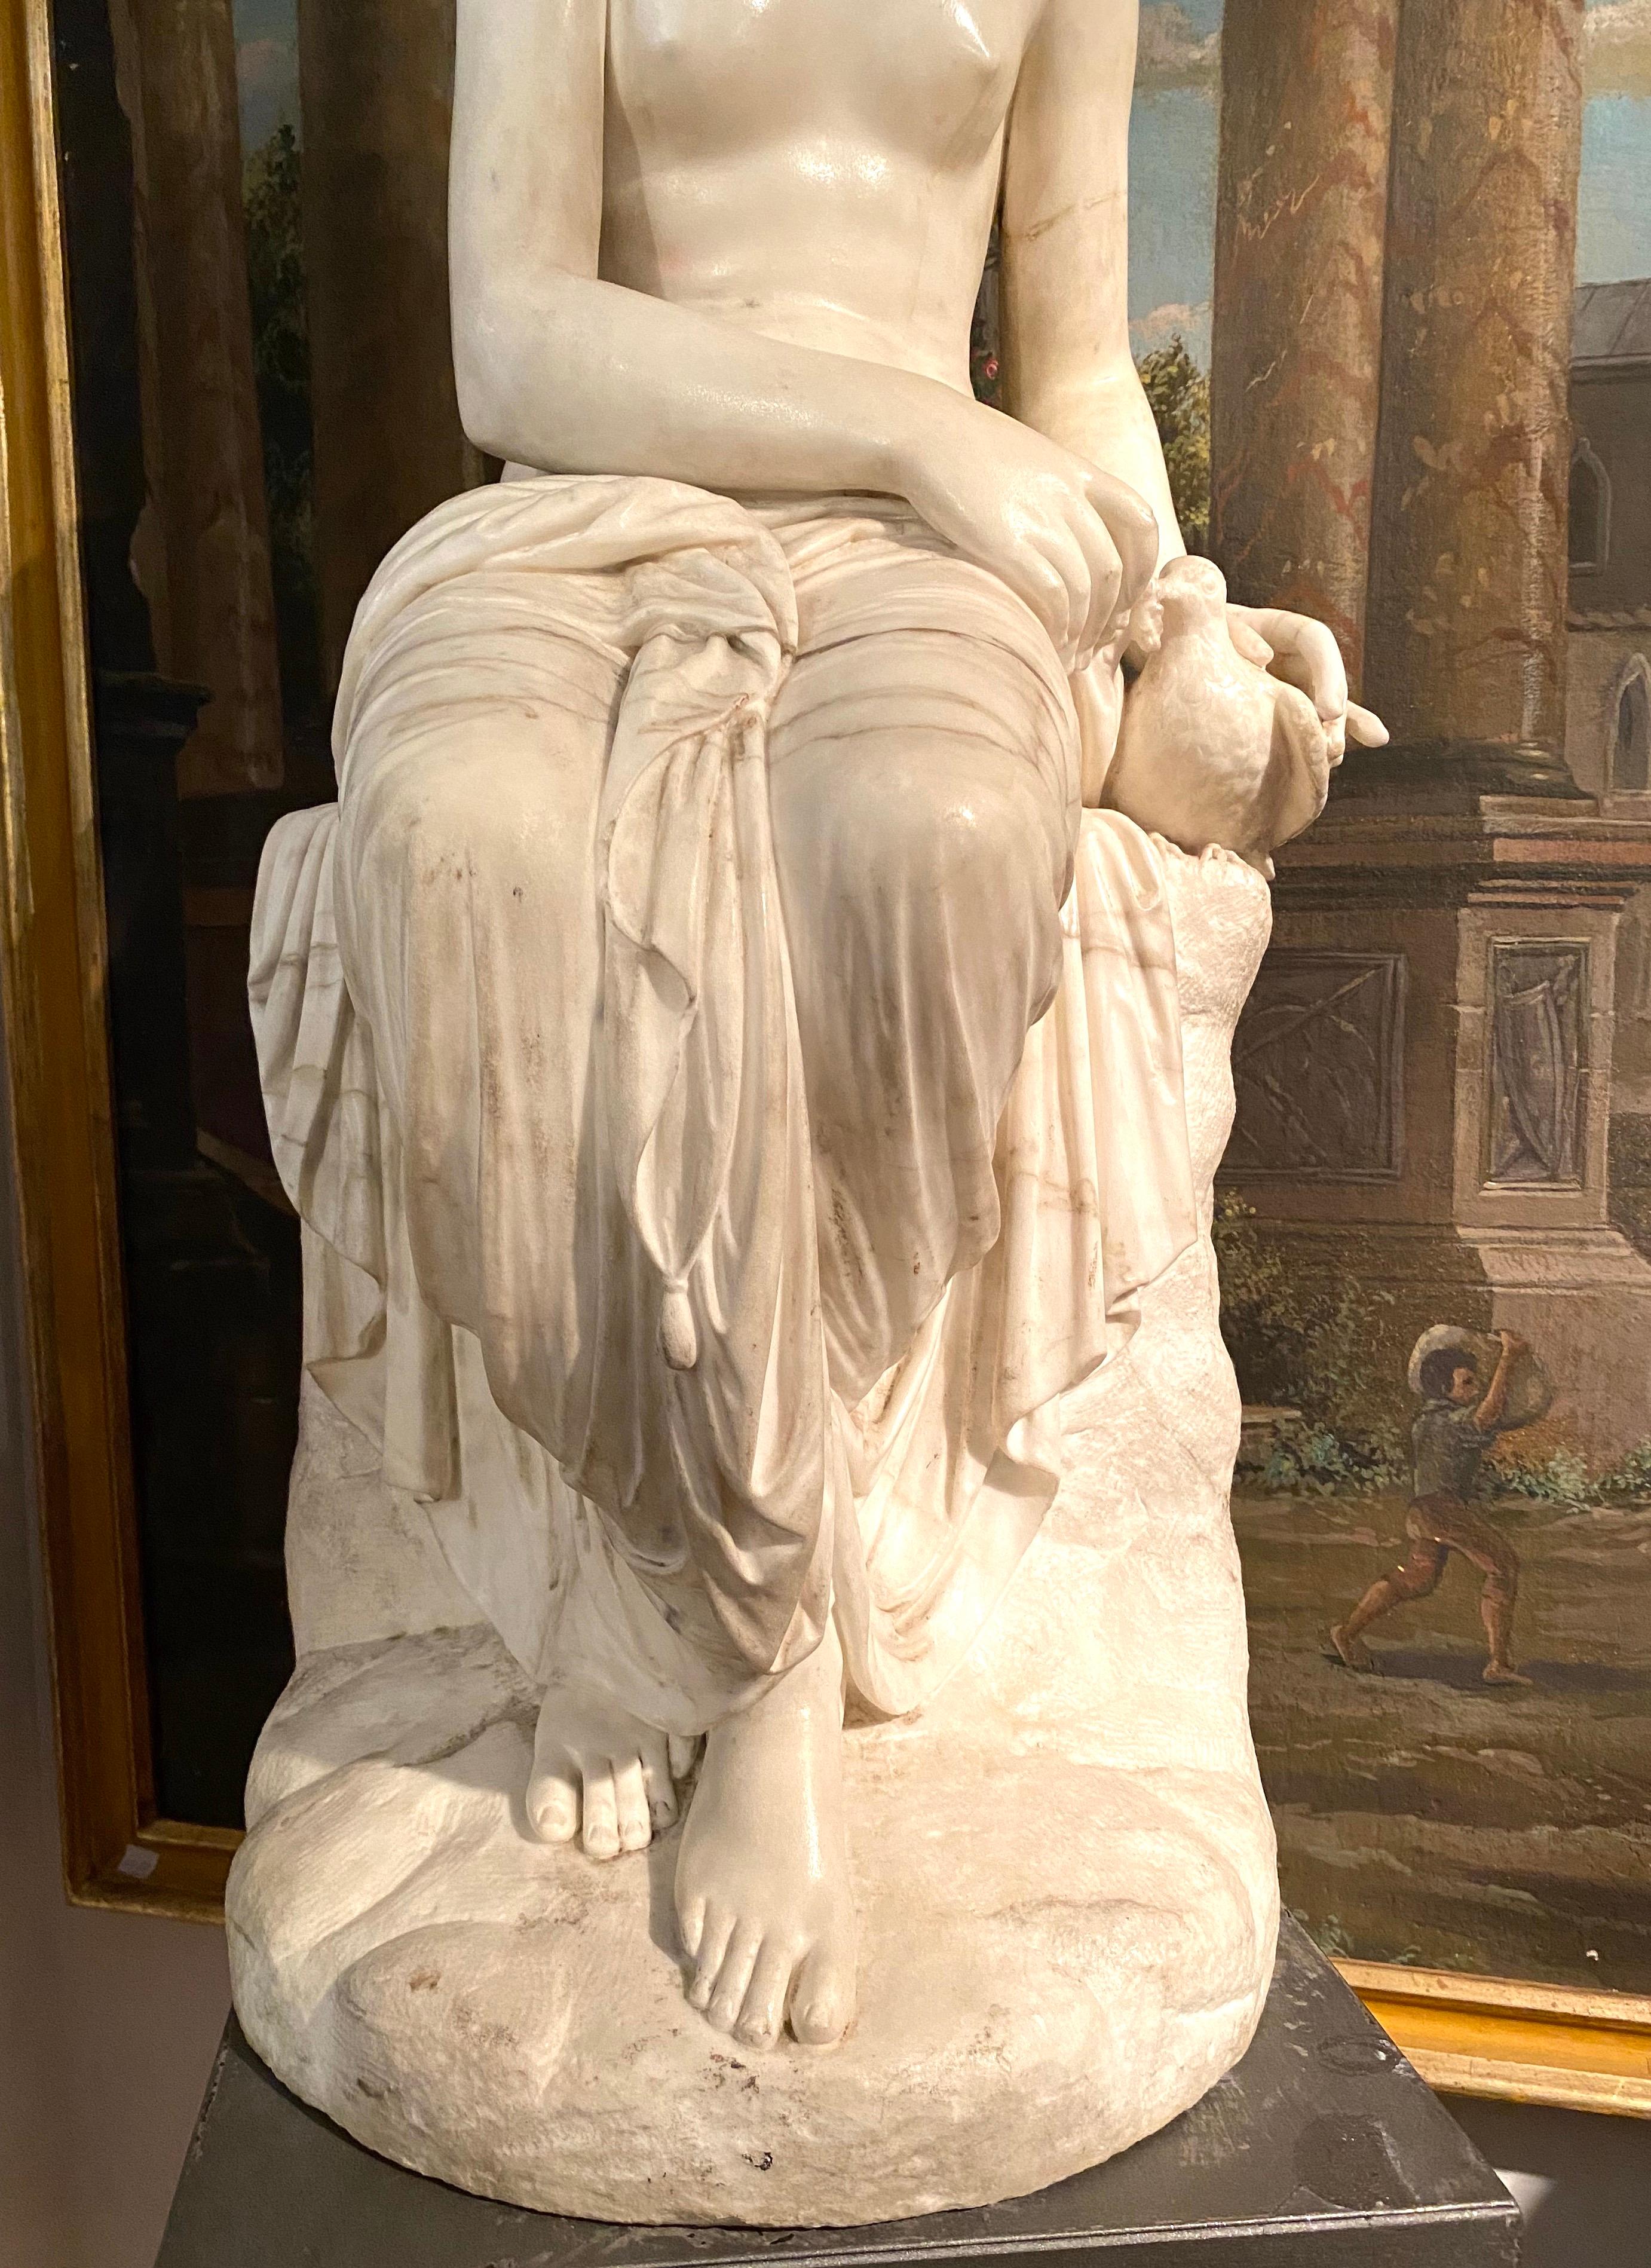 Fine Neoclassical White Marble Sculpture of Seated Nymph  - Brown Figurative Sculpture by Lorenzo Bartolini